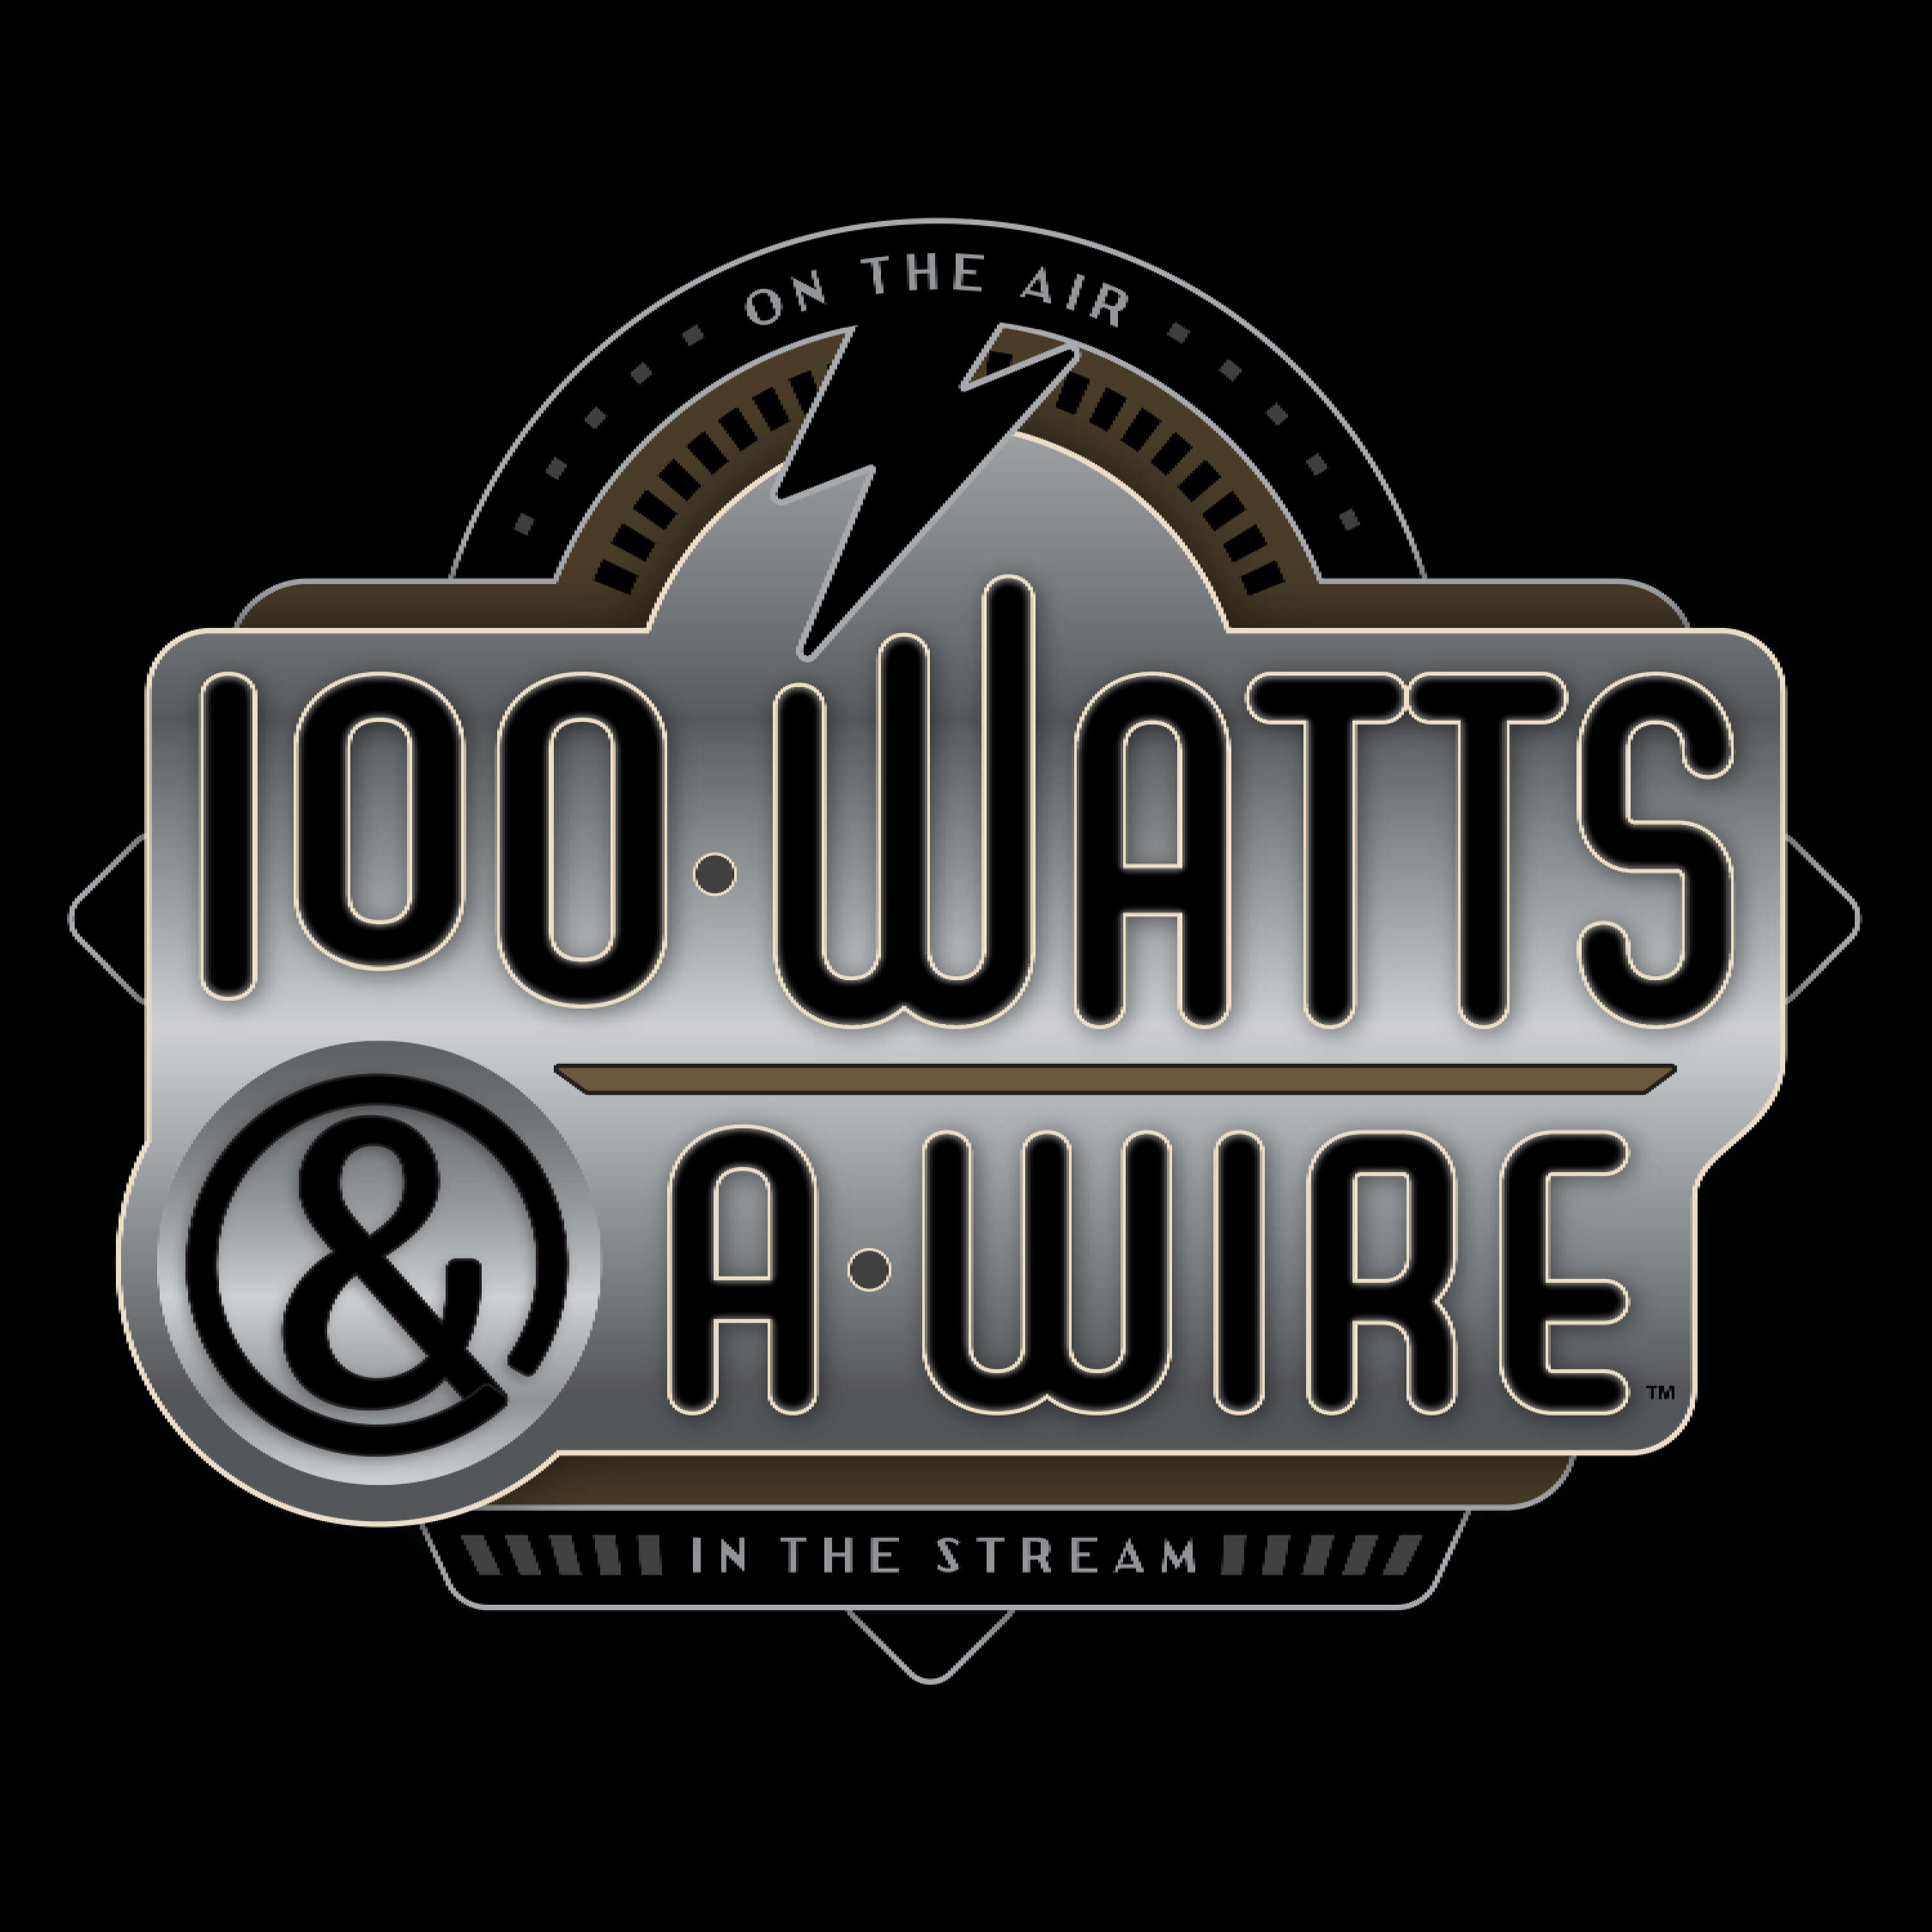 Artwork for podcast 100 Watts and a Wire